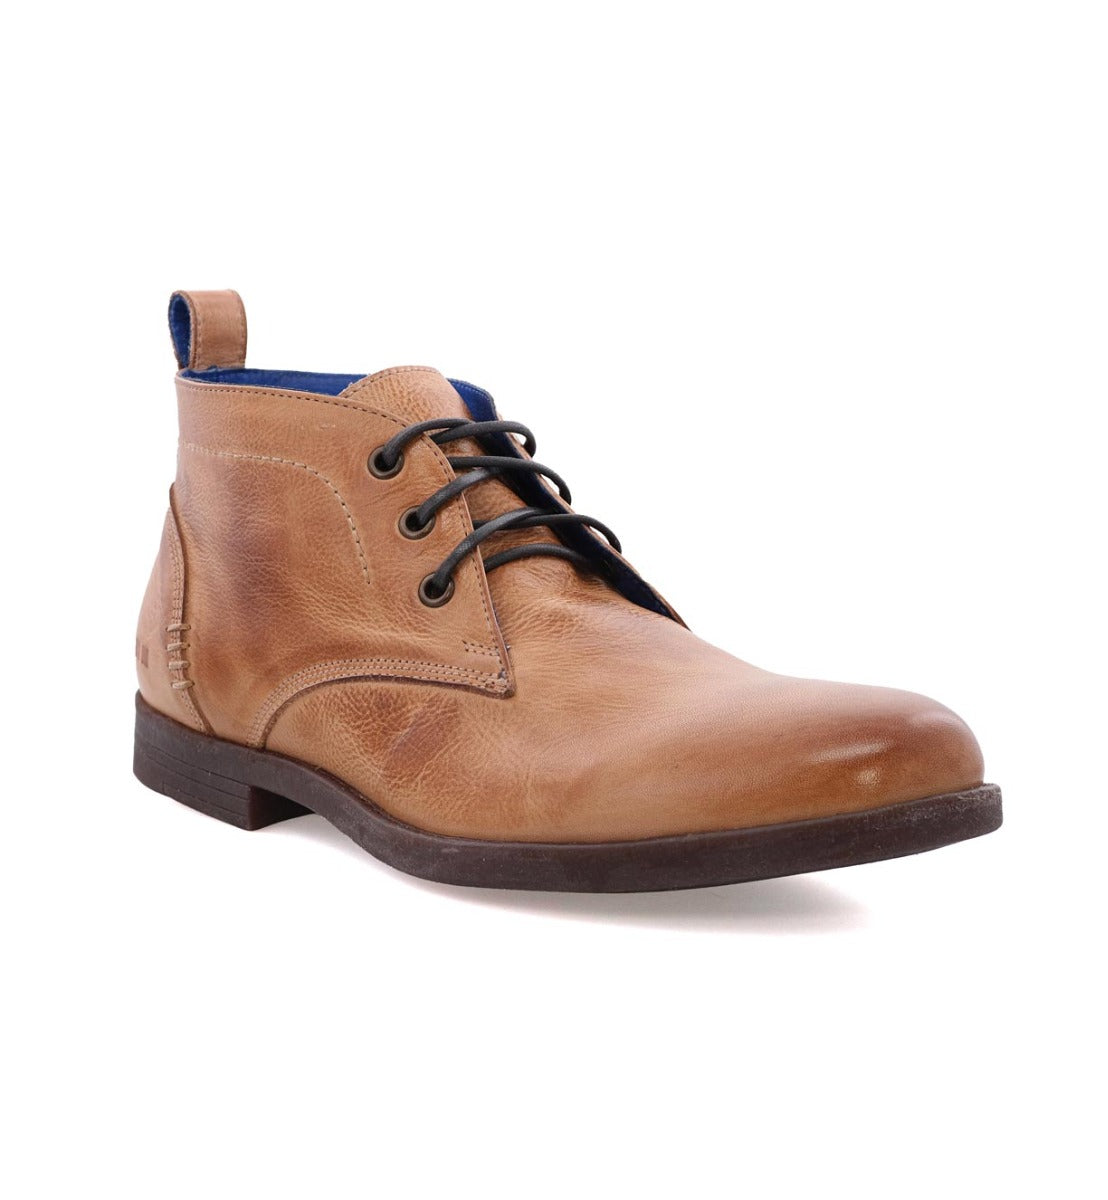 A single tan Illiad men's dress boot with laces, isolated on a white background.